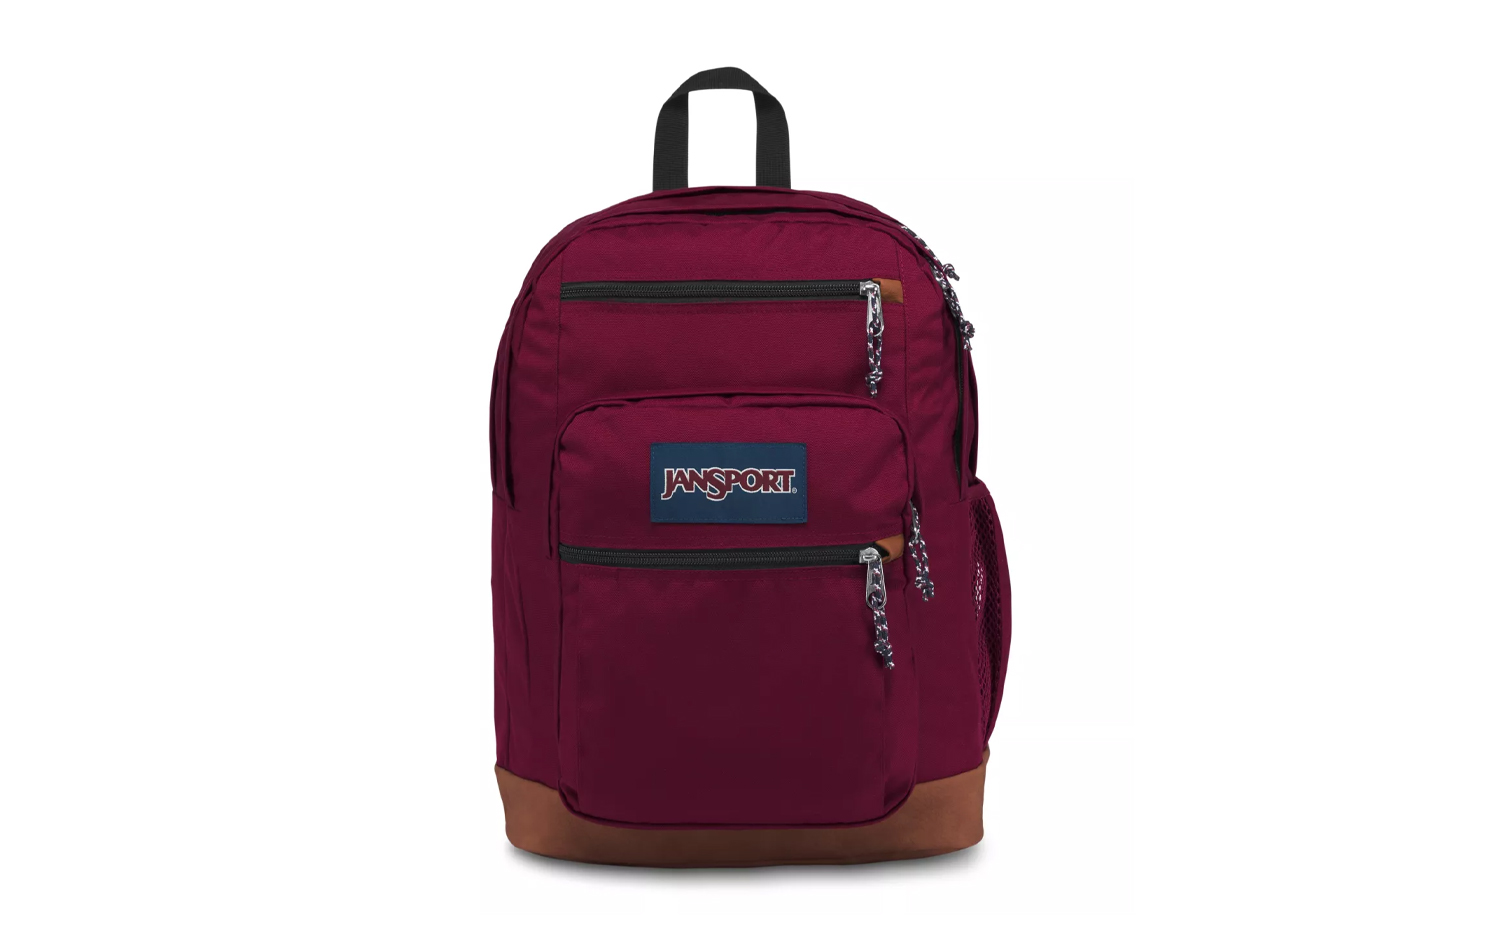 The JanSport Cool Student Backpack has space for everything, including your MacBook.